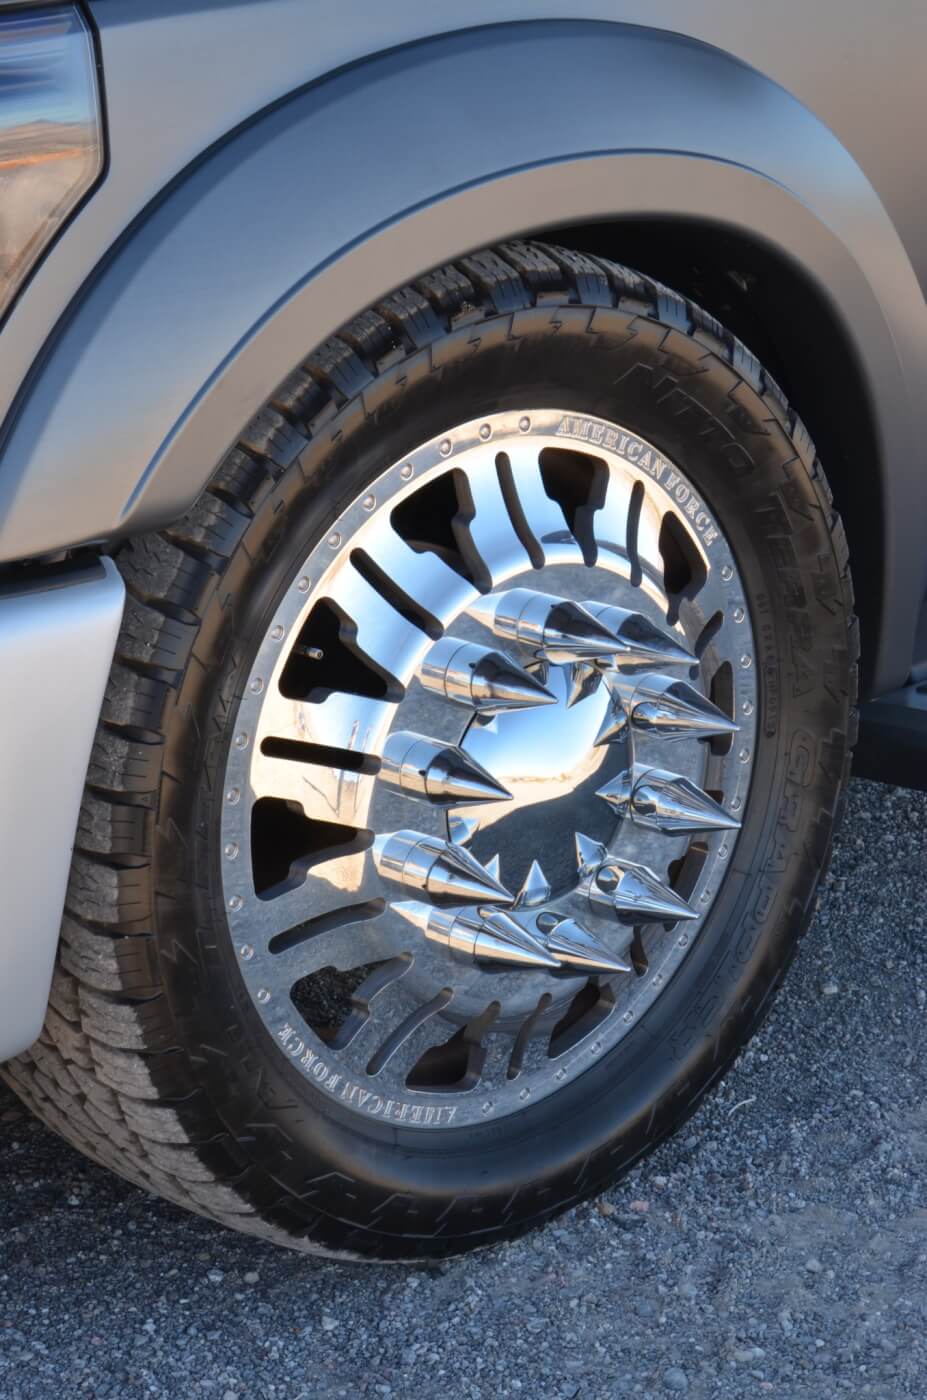 The lug nut spikes are a perfect touch adding to the Mini-Semi theme. 